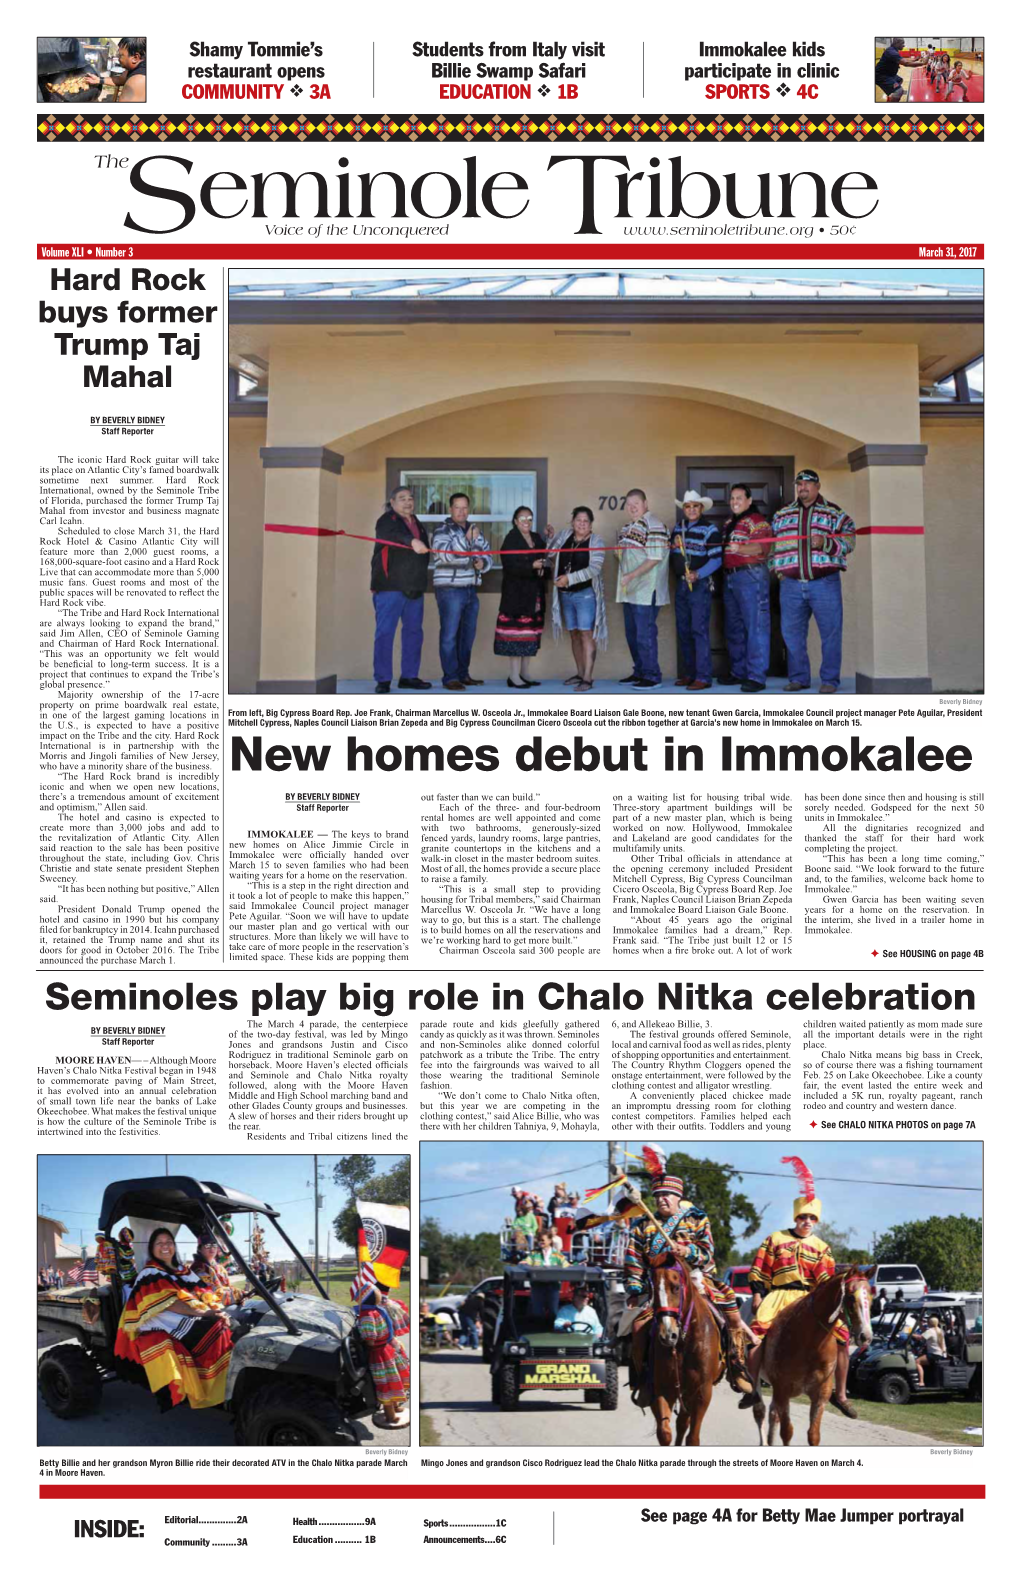 New Homes Debut in Immokalee